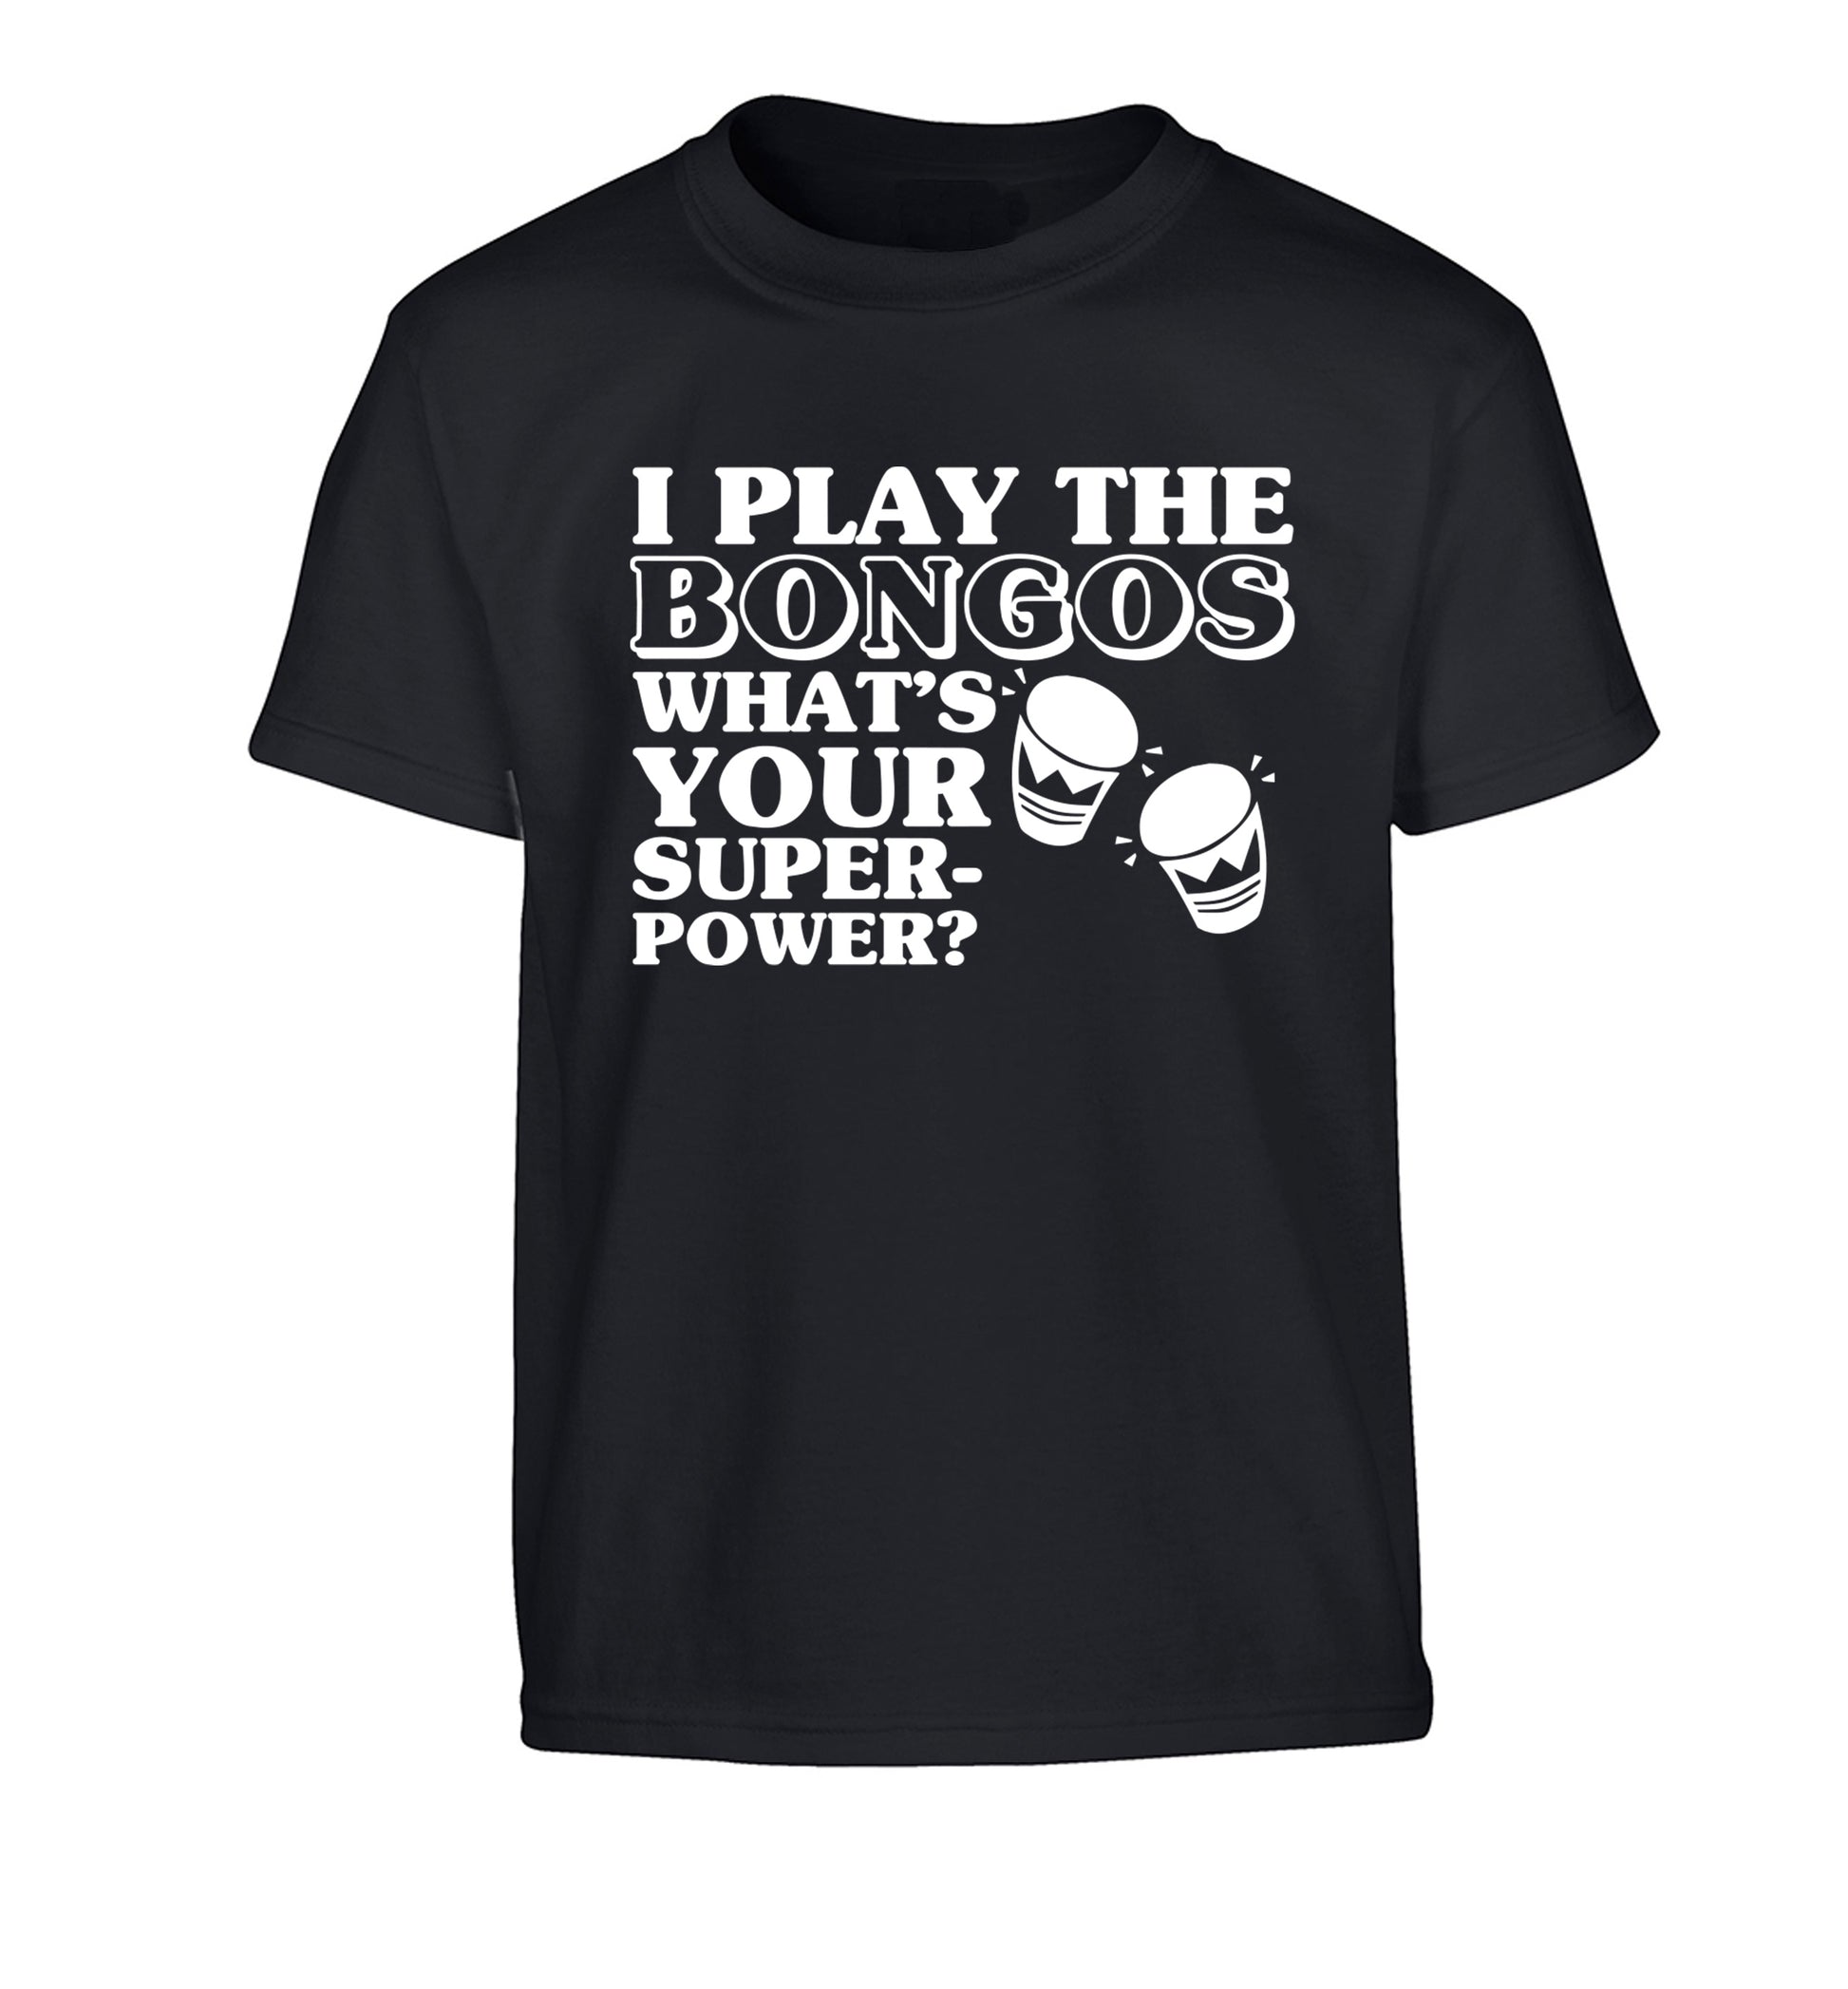 I play the bongos what's your superpower? Children's black Tshirt 12-14 Years